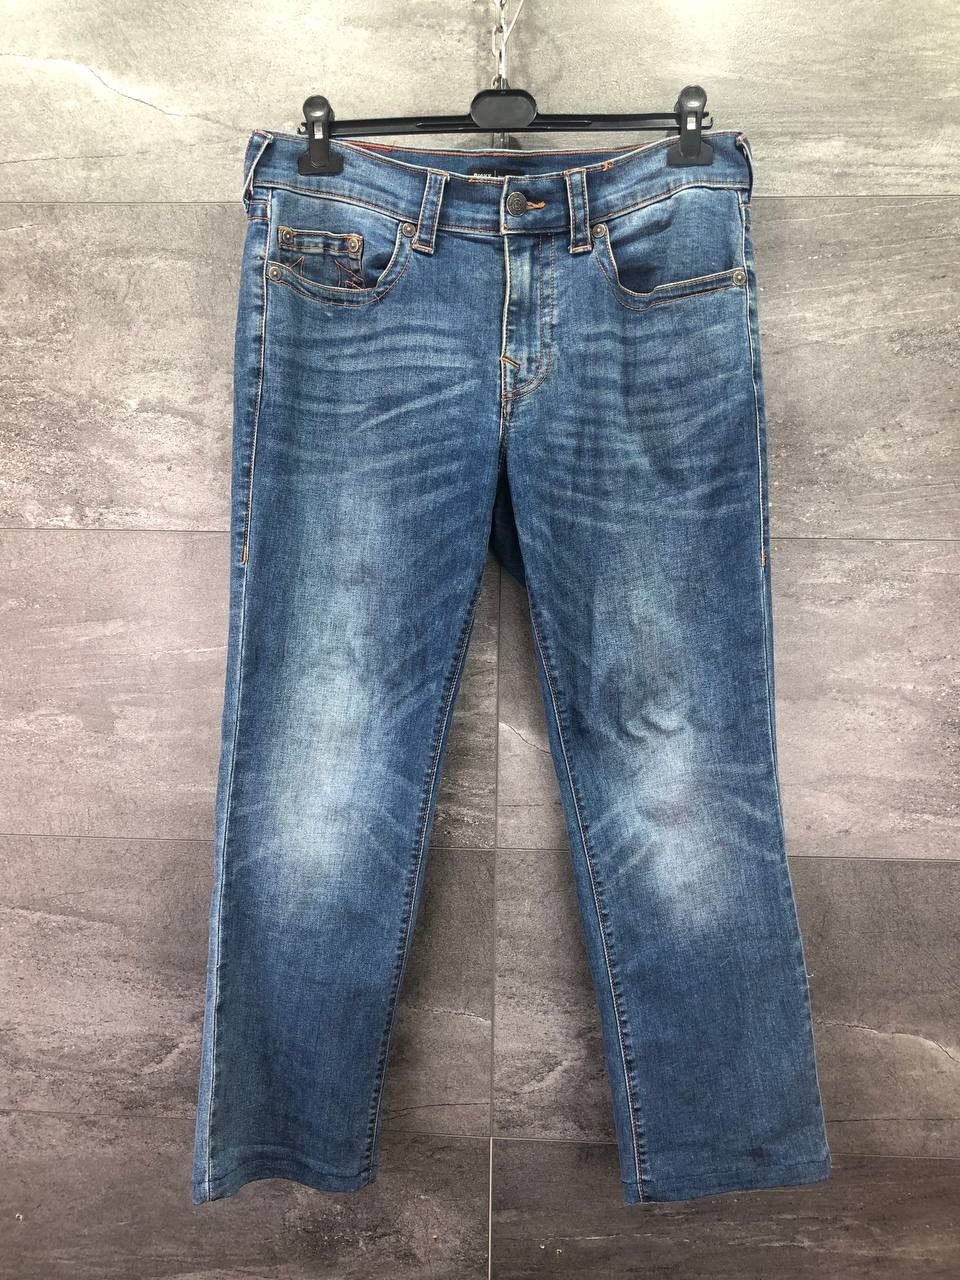 Pre-owned Jean X True Religion Ricky Big T Nf Pants Jeans Denim Size 32 In Blue